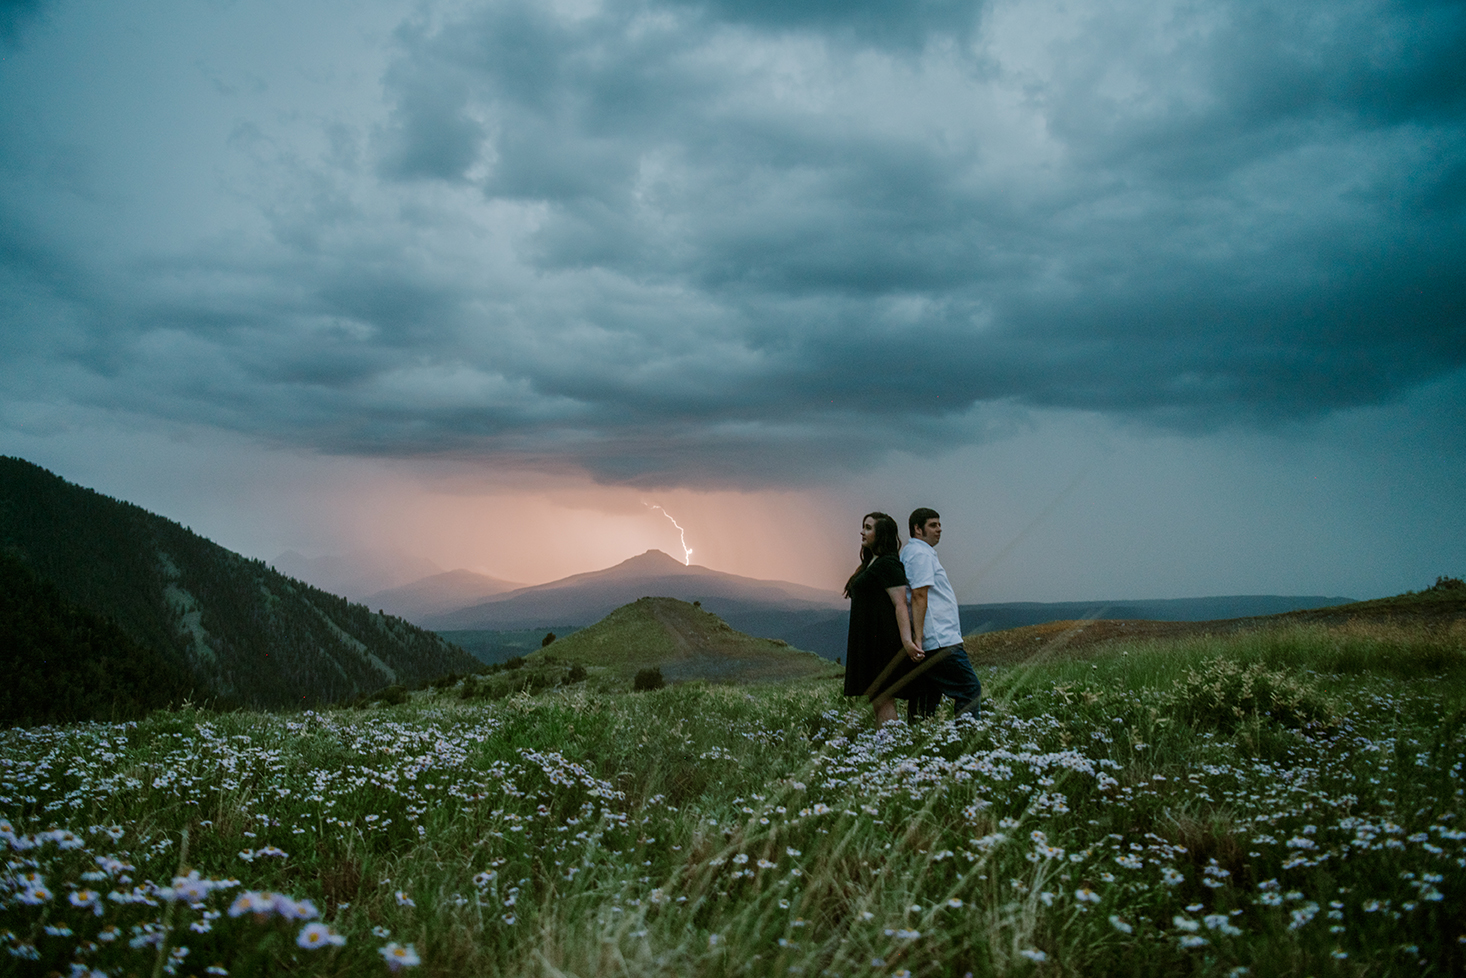 Couple standing in field of flowers as lightning strikes a mountain in the distance